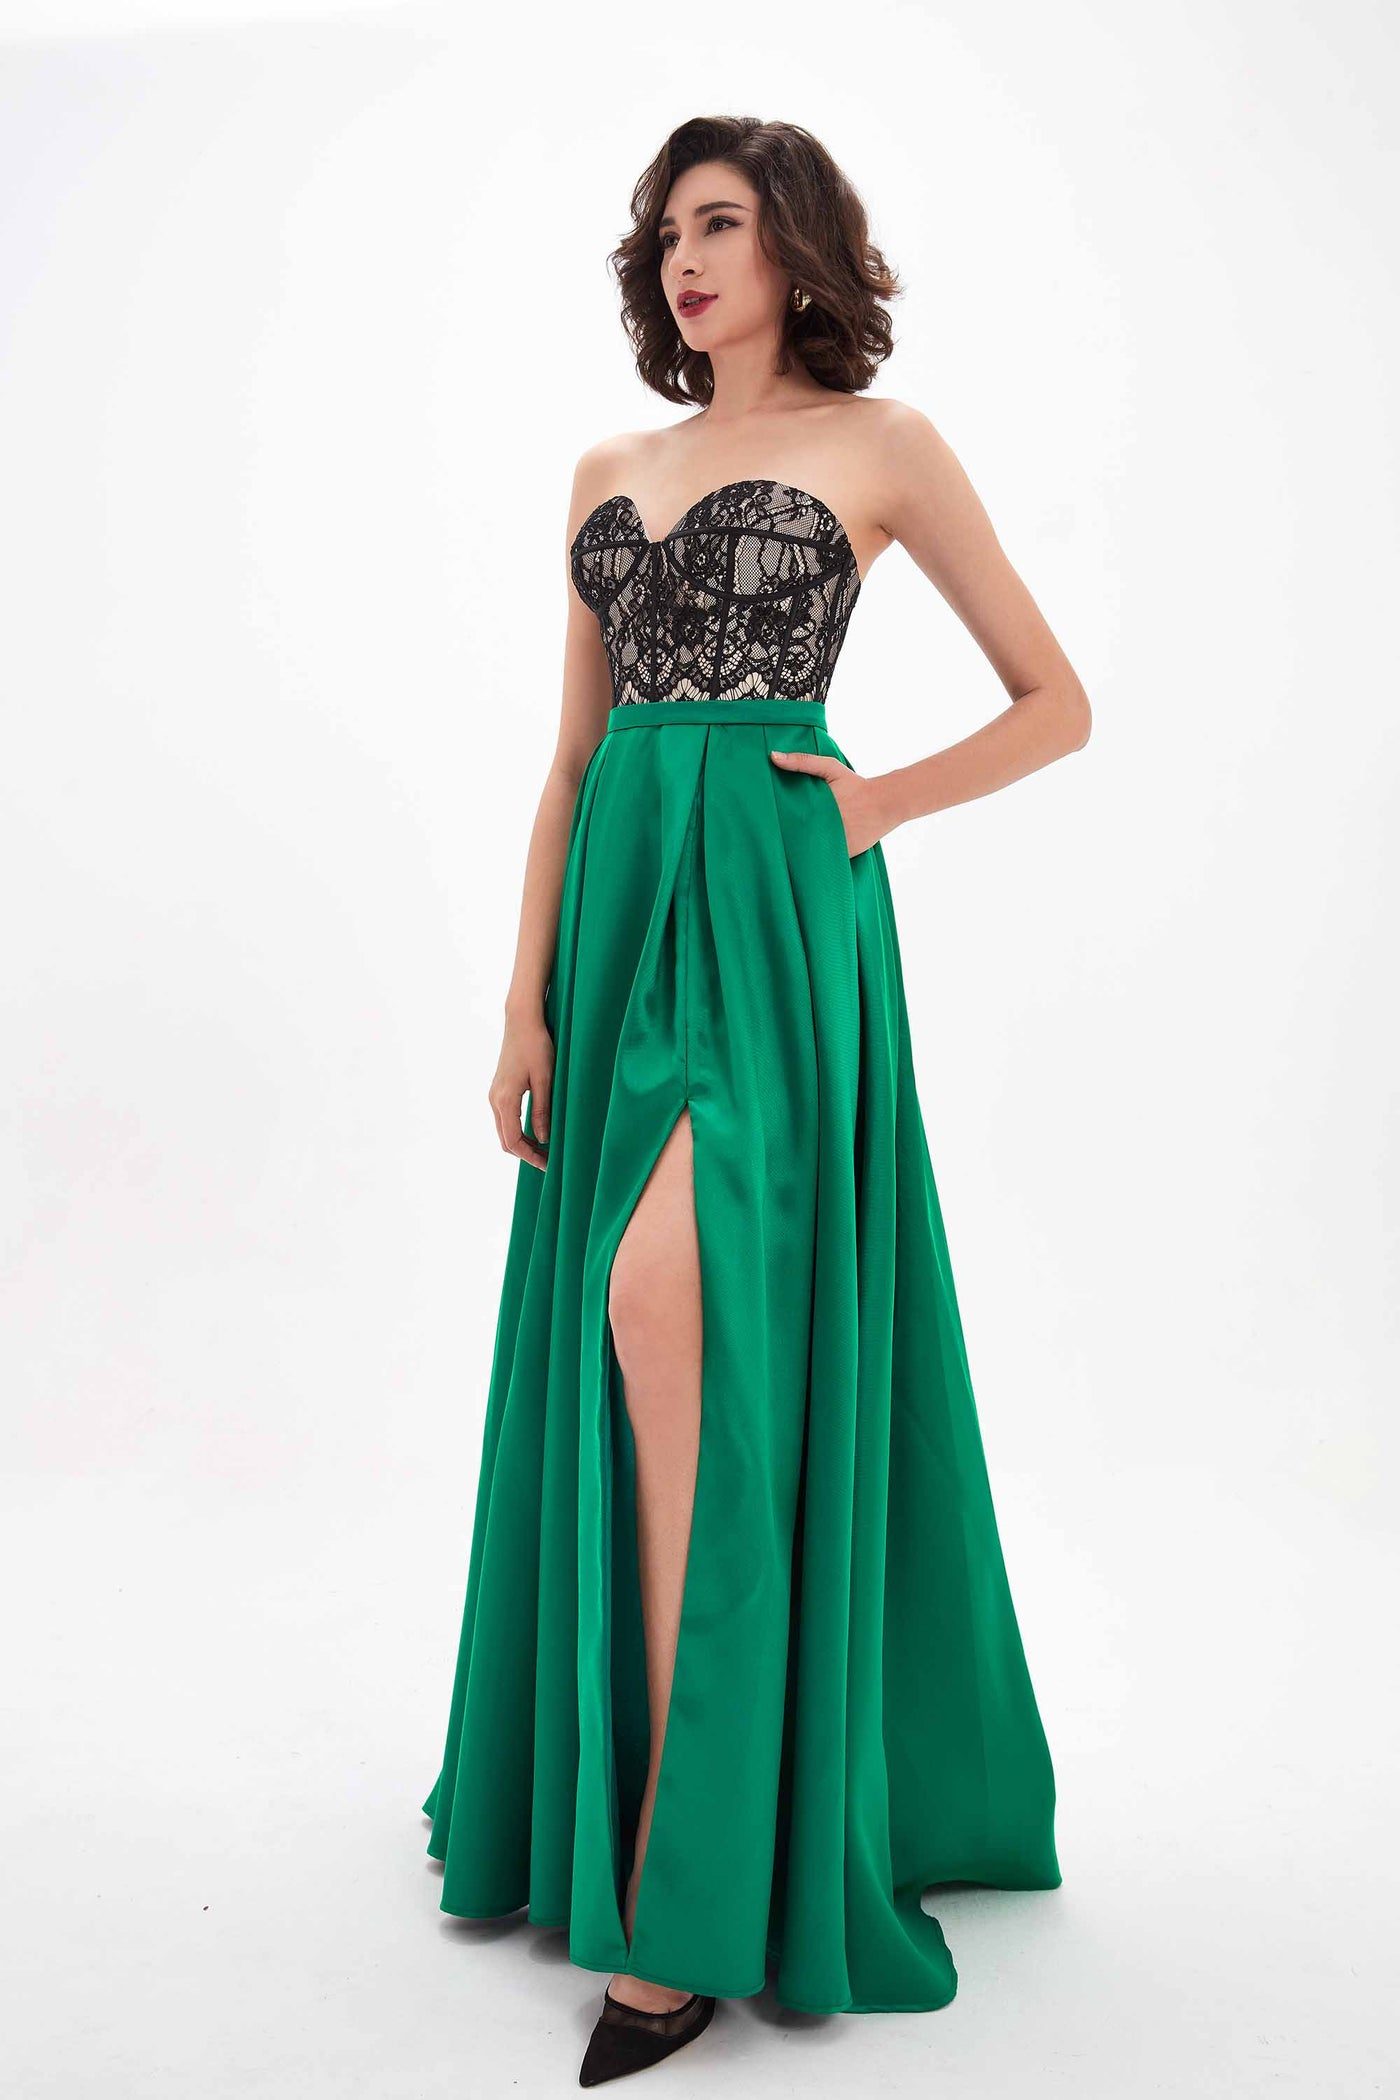 Sweetheart Lace High Slit Prom Dress